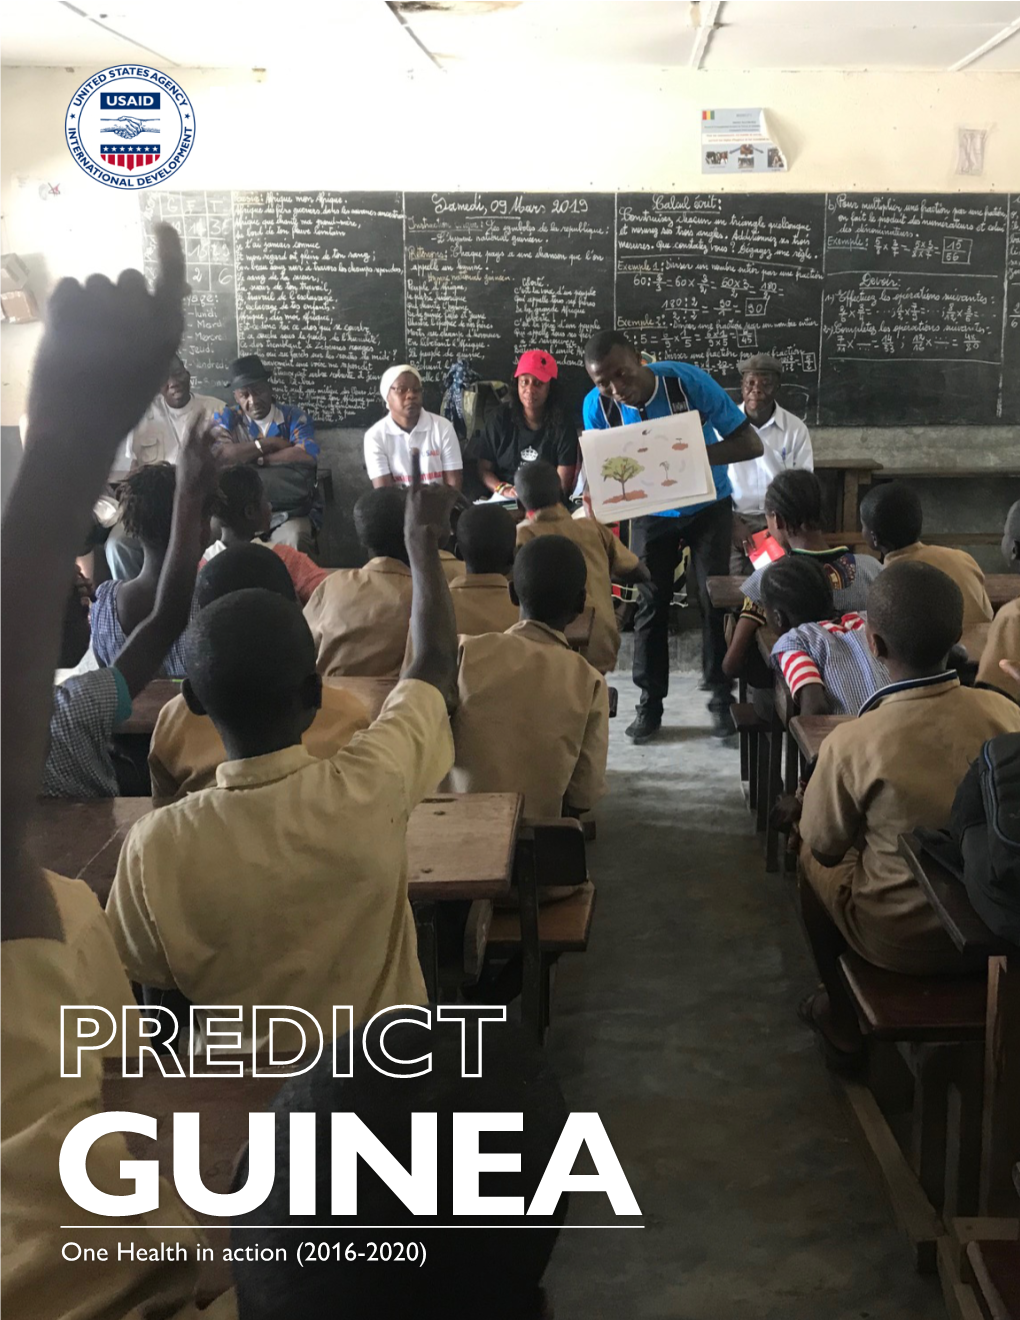 GUINEA One Health in Action (2016-2020) Lessons Learned from Ebola GUINEA EBOLA HOST PROJECT